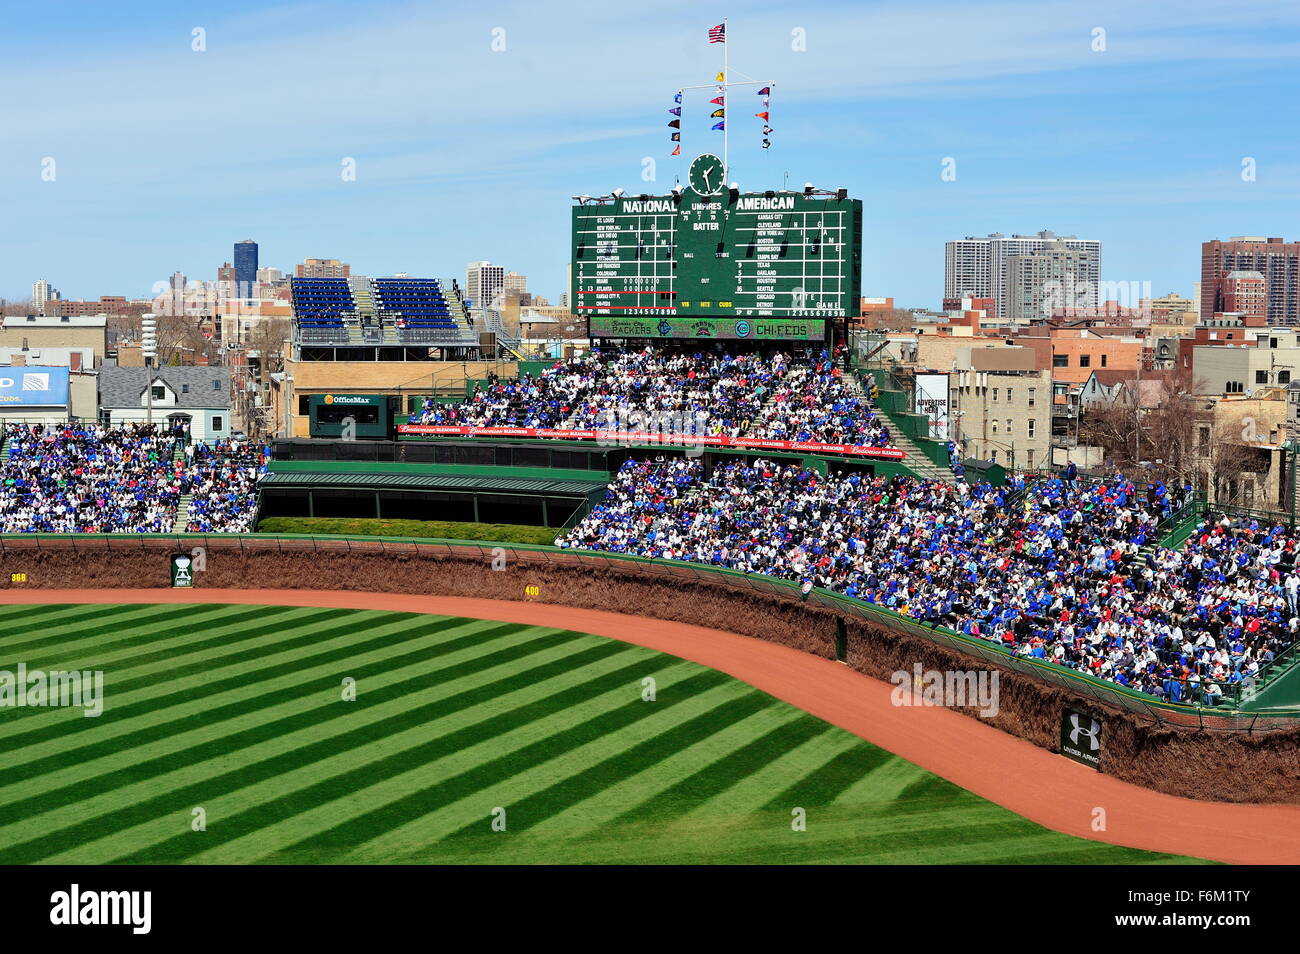 A look at the playing surface at iconic Wrigley Field in Chicago during a day game in 2014. Chicago, Illinois, USA. Stock Photo